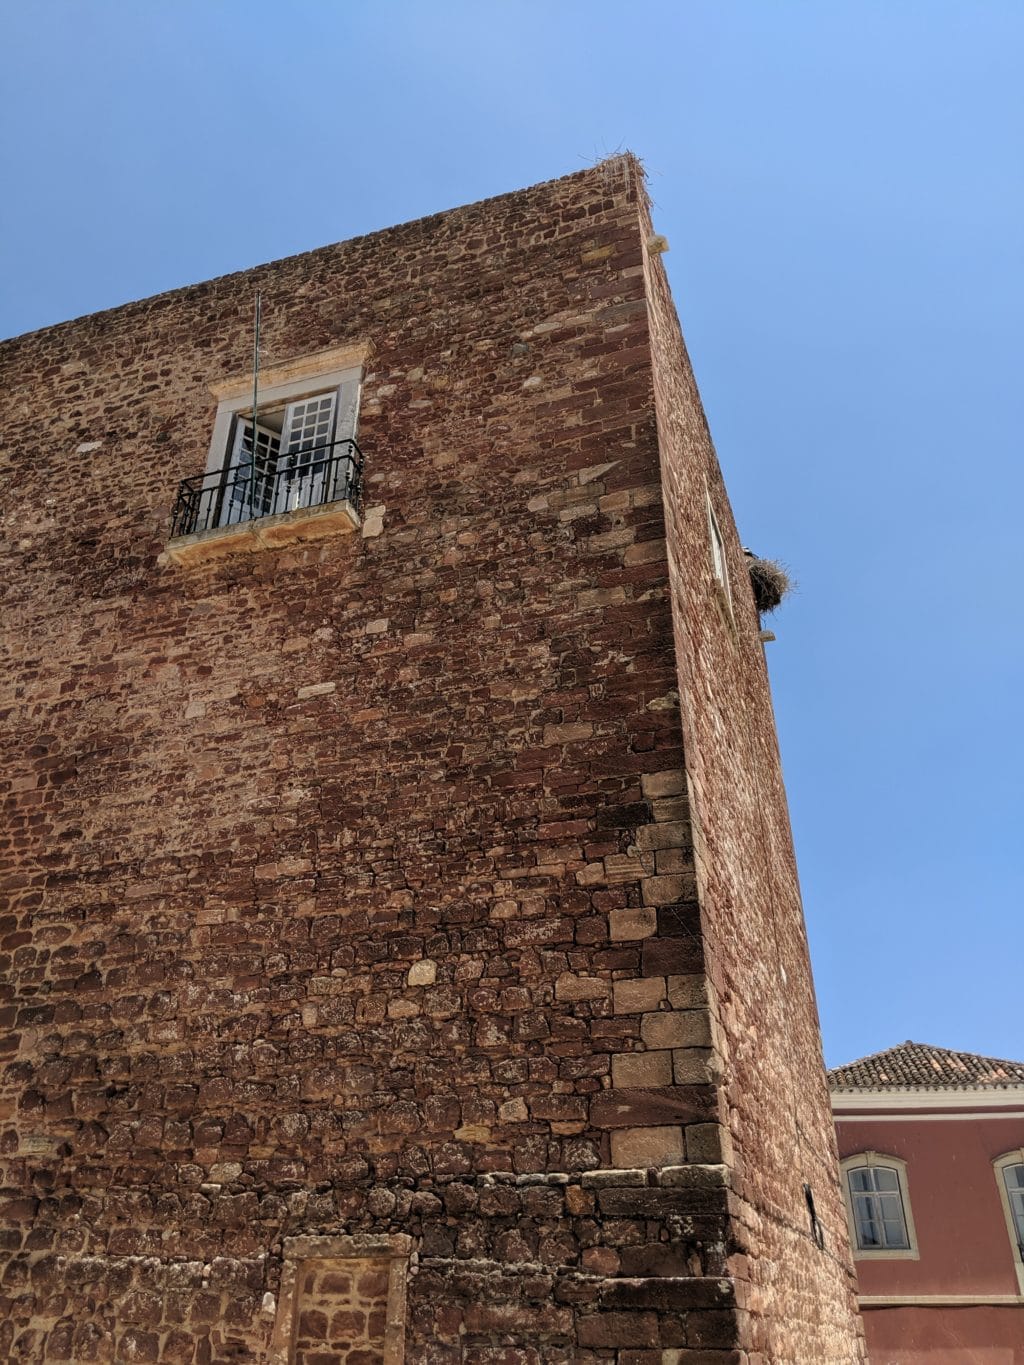 A detail of the Turret of the City Gate, in Silves